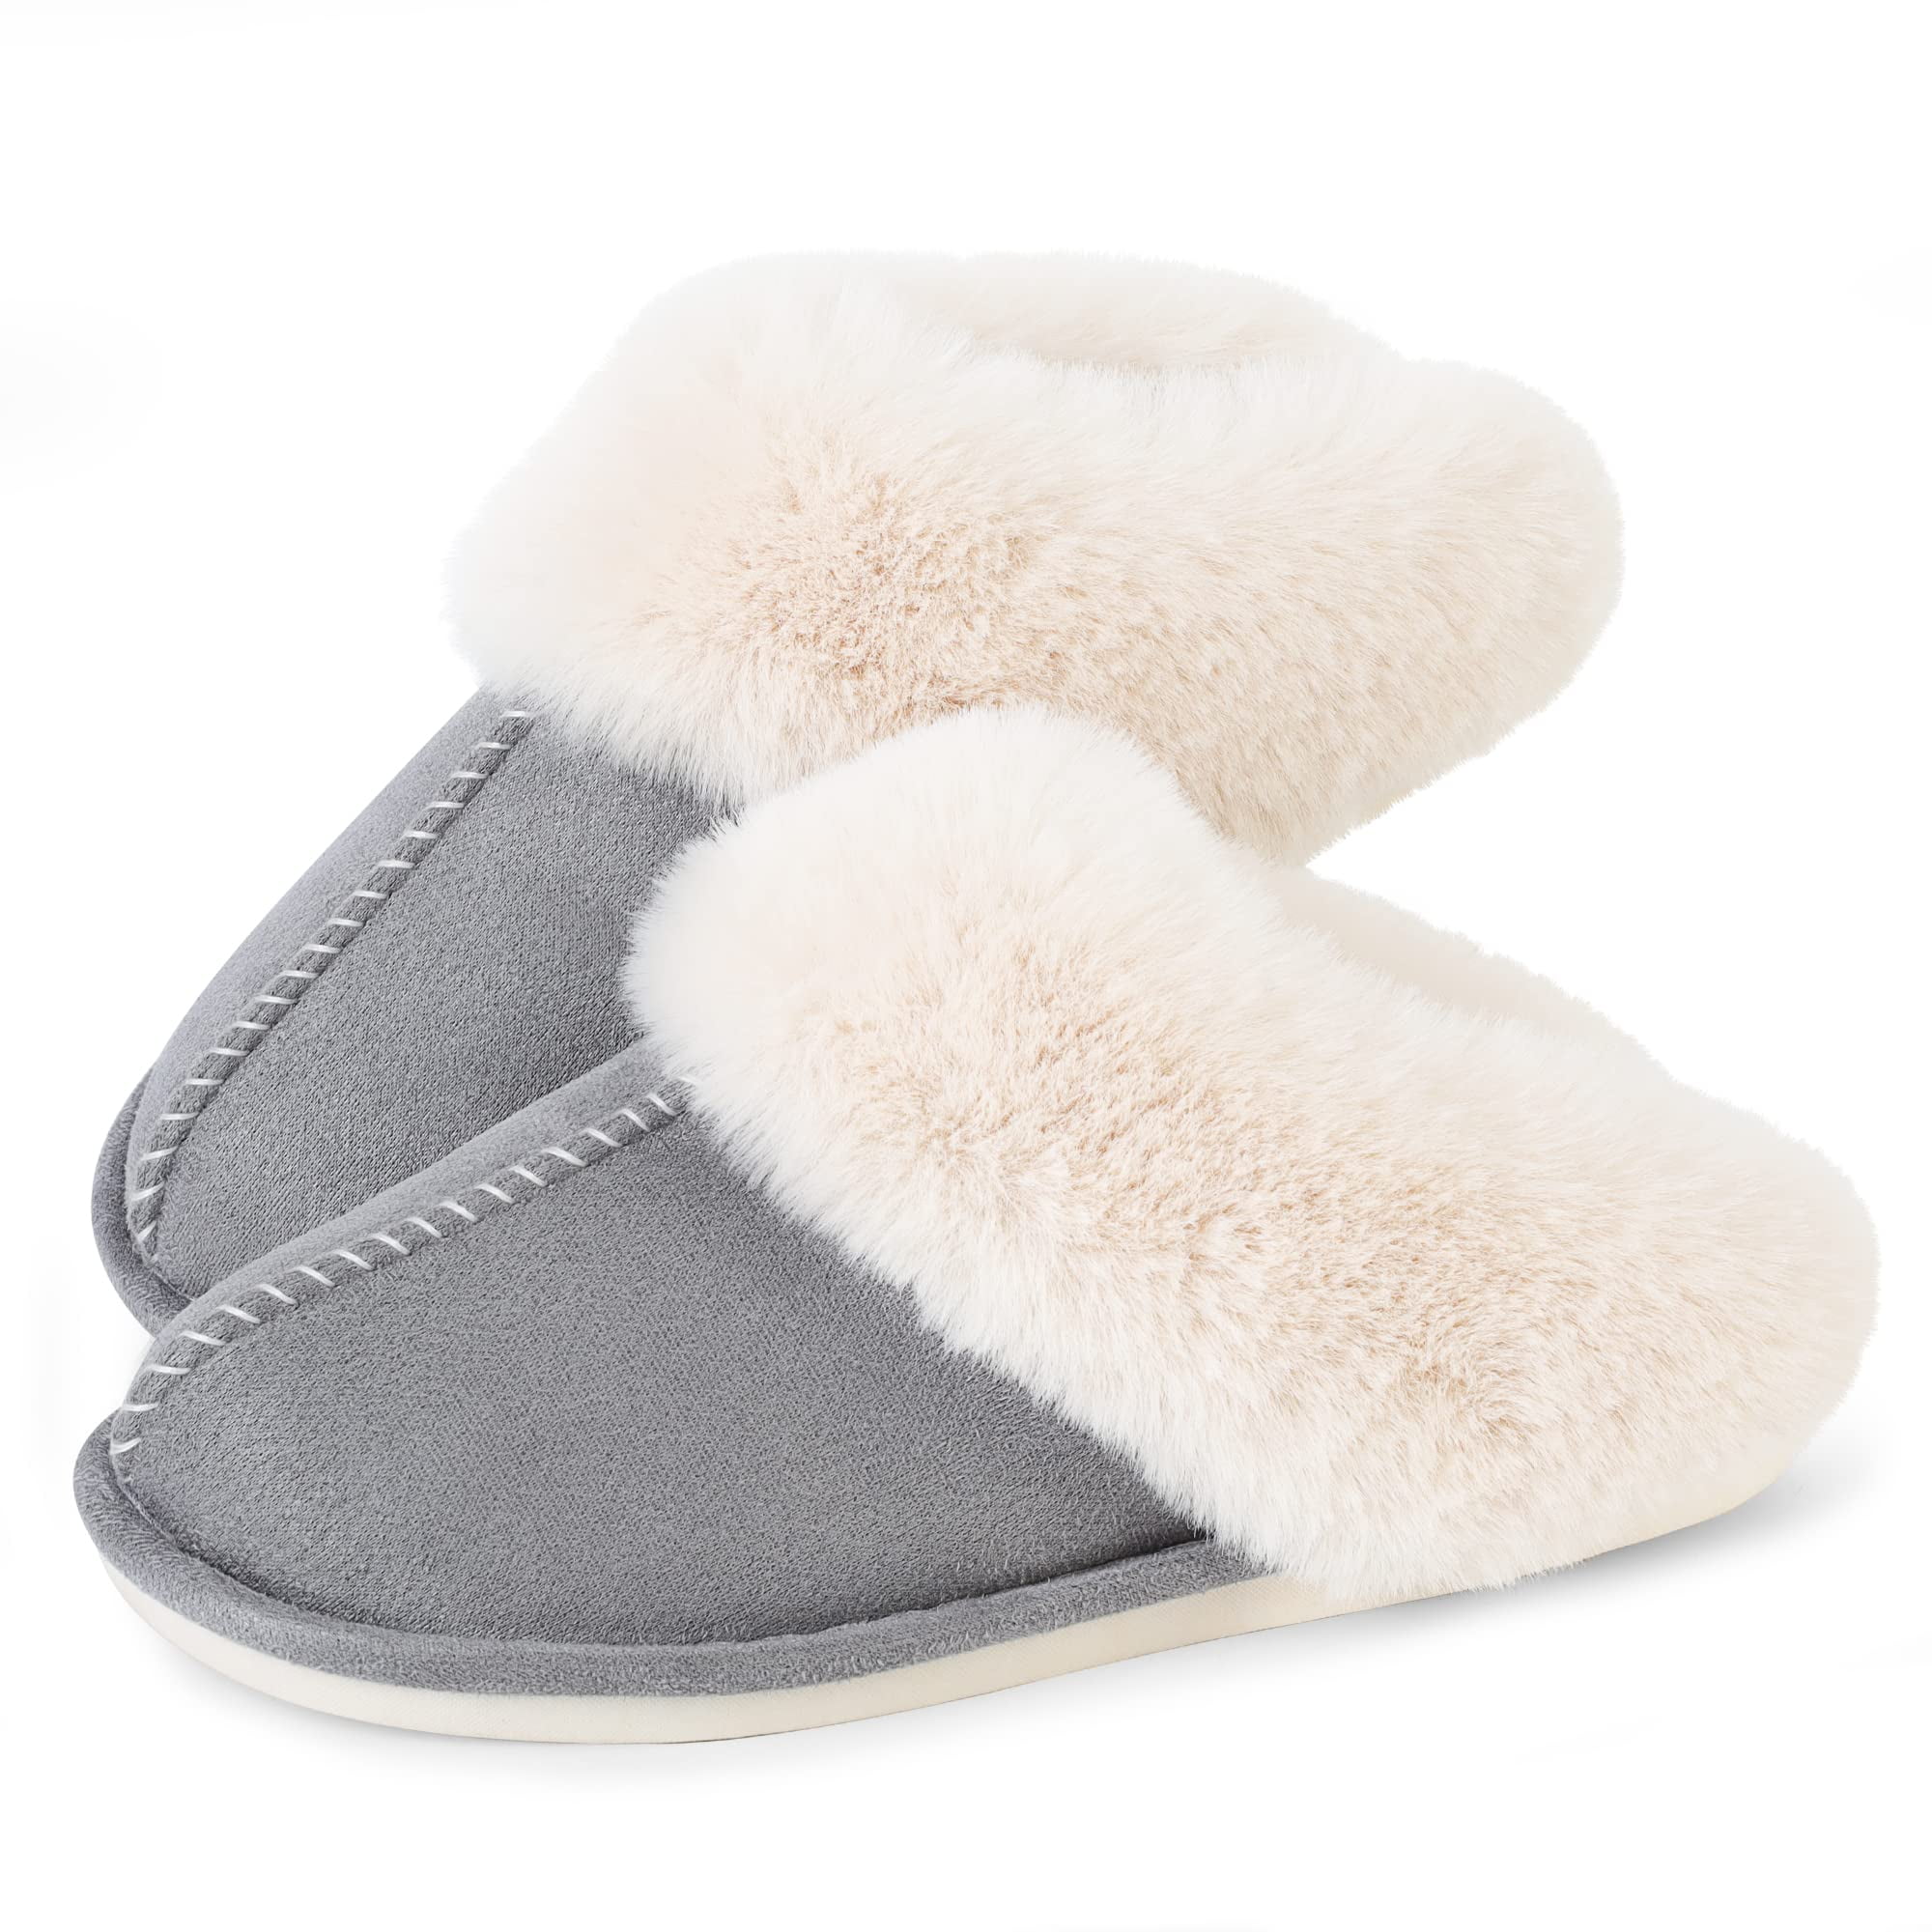 SOSUSHOE Womens Slippers Memory Foam Fluffy Fur Soft Slippers Warm House  Shoes Indoor Outdoor Winter